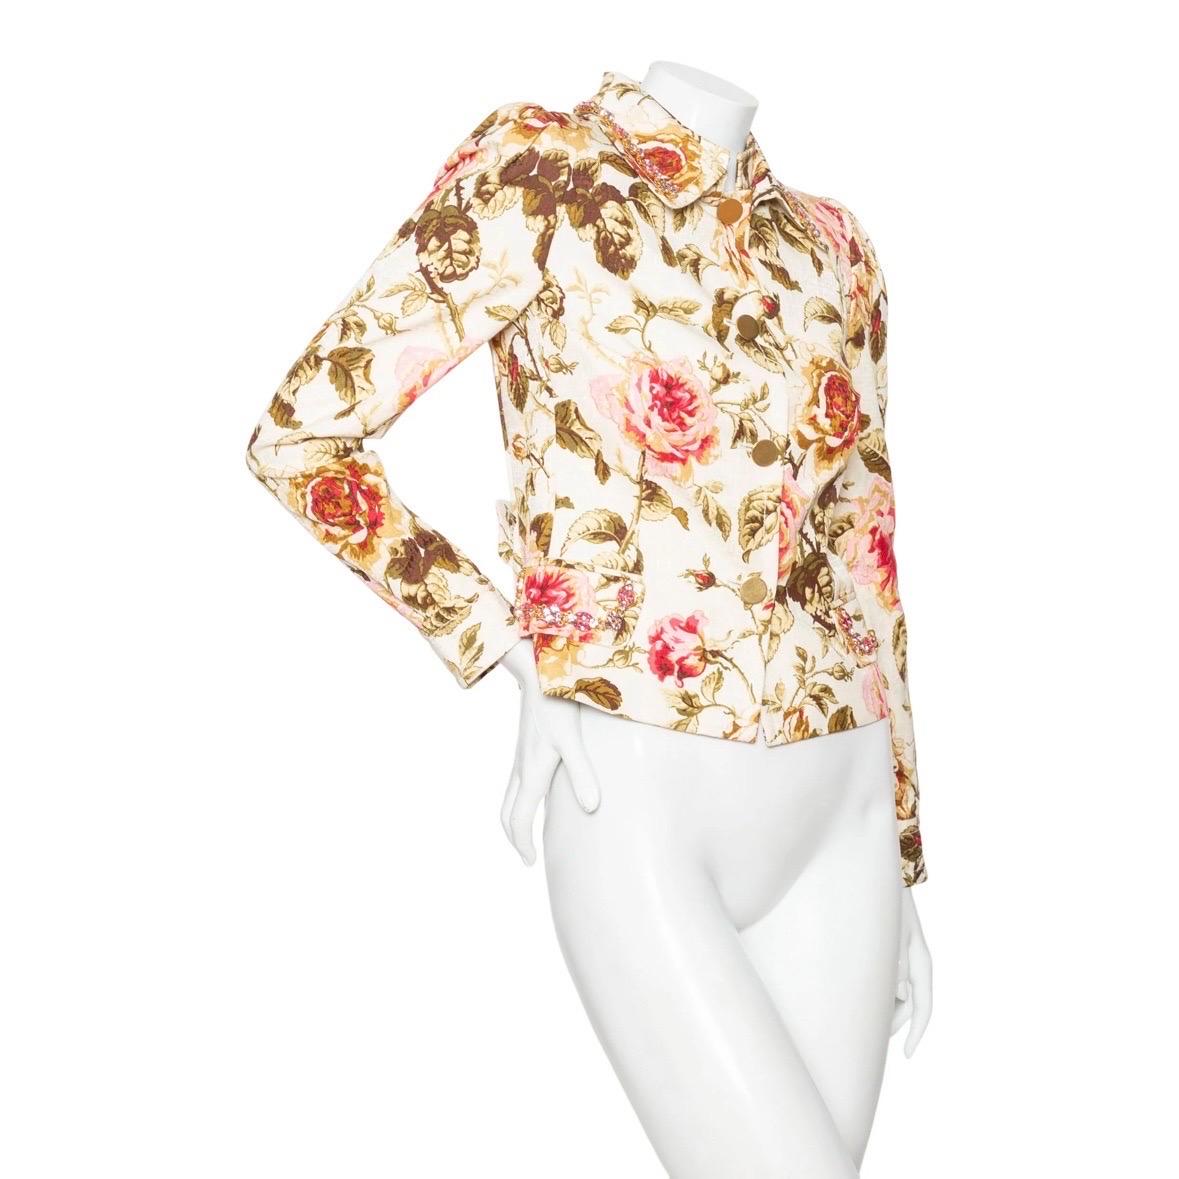 Dolce & Gabbana Floral Print Rhinestone Collared Jacket

Circa 2010s
Cream/Pink/Green
Floral print
Pointed collar with rhinestone trim
Front flap pockets with rhinestone trim
Front button closure with matte gold-tone buttons
Belted back detail
Made